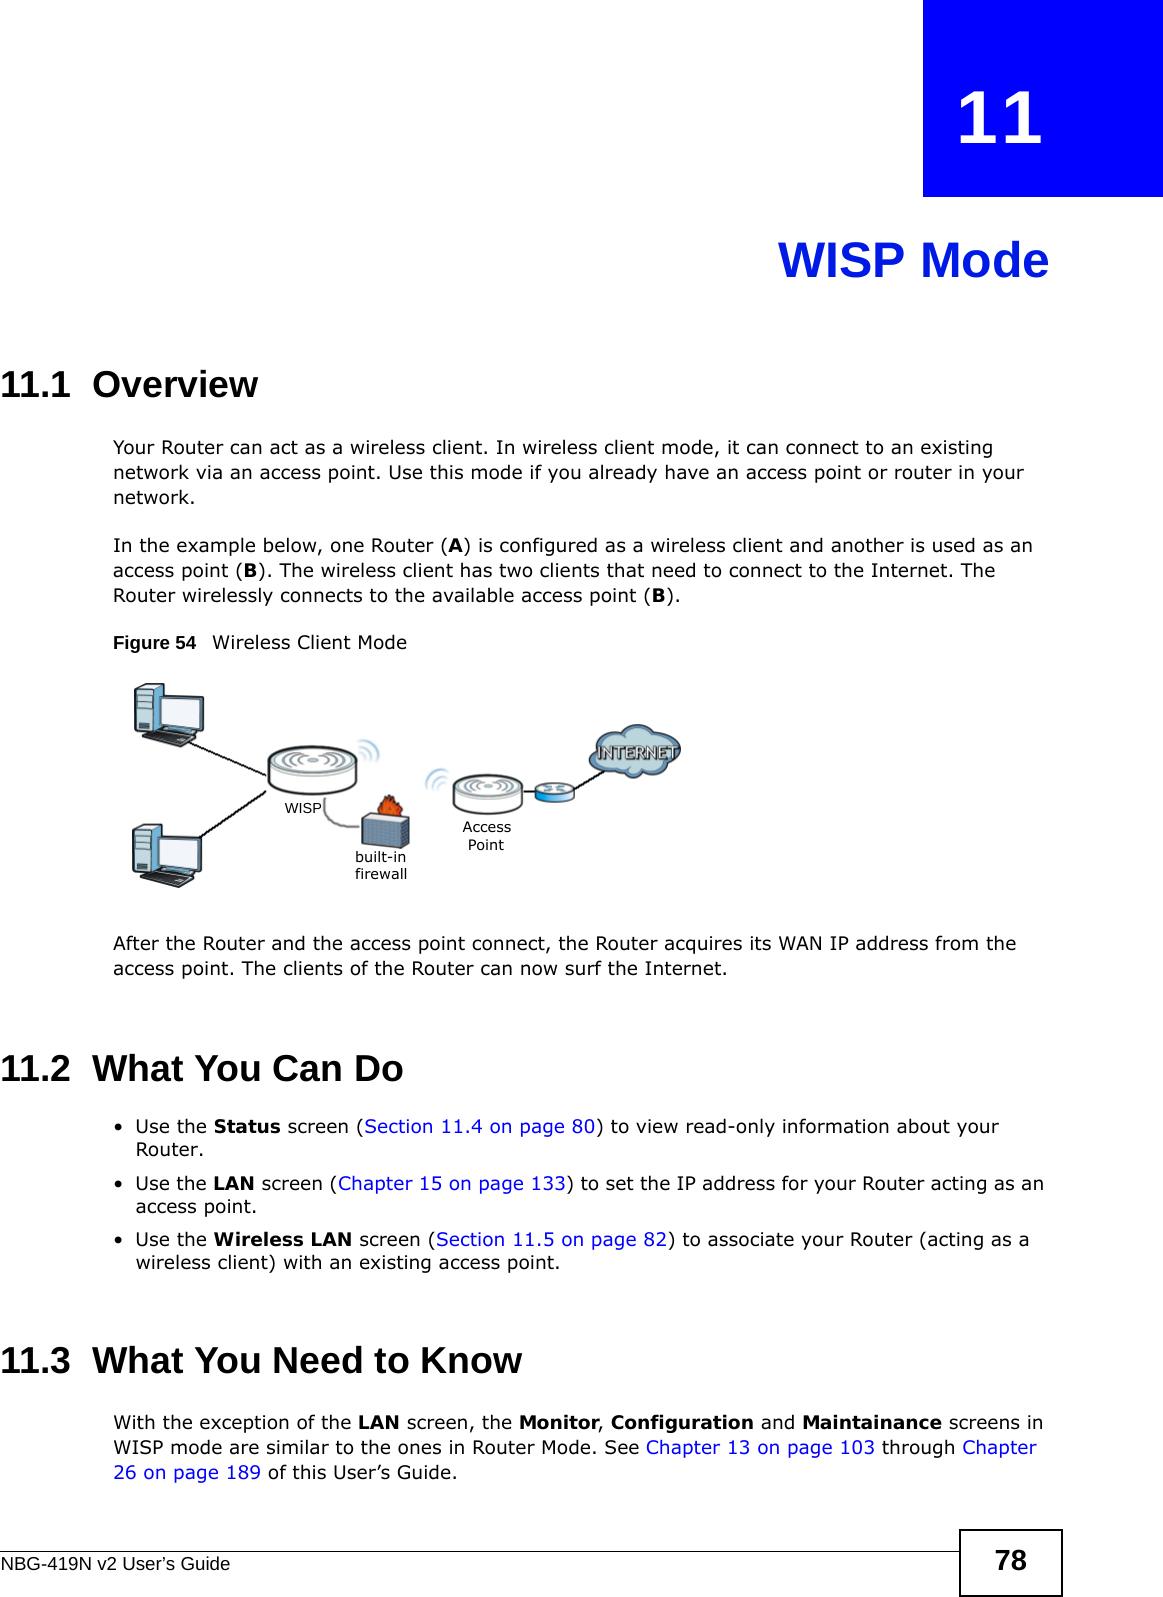 NBG-419N v2 User’s Guide 78CHAPTER   11WISP Mode11.1  OverviewYour Router can act as a wireless client. In wireless client mode, it can connect to an existing network via an access point. Use this mode if you already have an access point or router in your network.In the example below, one Router (A) is configured as a wireless client and another is used as an access point (B). The wireless client has two clients that need to connect to the Internet. The Router wirelessly connects to the available access point (B). Figure 54   Wireless Client ModeAfter the Router and the access point connect, the Router acquires its WAN IP address from the access point. The clients of the Router can now surf the Internet. 11.2  What You Can Do•Use the Status screen (Section 11.4 on page 80) to view read-only information about your Router.•Use the LAN screen (Chapter 15 on page 133) to set the IP address for your Router acting as an access point.•Use the Wireless LAN screen (Section 11.5 on page 82) to associate your Router (acting as a wireless client) with an existing access point.11.3  What You Need to KnowWith the exception of the LAN screen, the Monitor, Configuration and Maintainance screens in WISP mode are similar to the ones in Router Mode. See Chapter 13 on page 103 through Chapter 26 on page 189 of this User’s Guide.built-infirewallAccessPointWISP